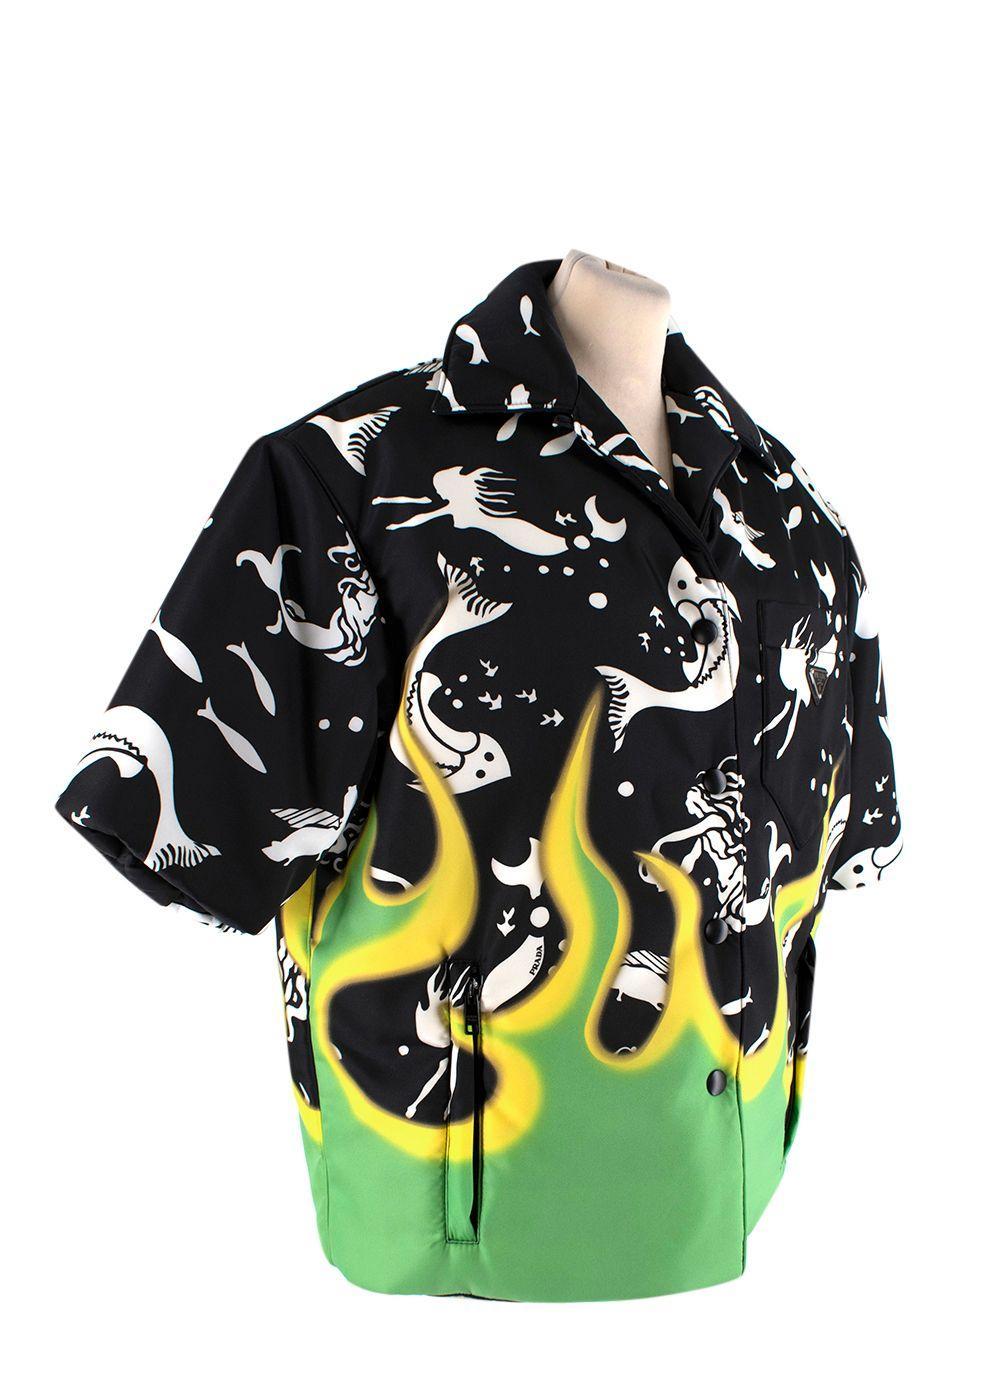 Prada Black, Green & Yellow Print Padded Nylon Shirt

- AW18
- Lightly padded shirt silhouette, can be worn as a top or jacket
- White marine motifs and signature flame hem
- Snap-button closure
- One patch and two zipped pockets

Materials:
64%